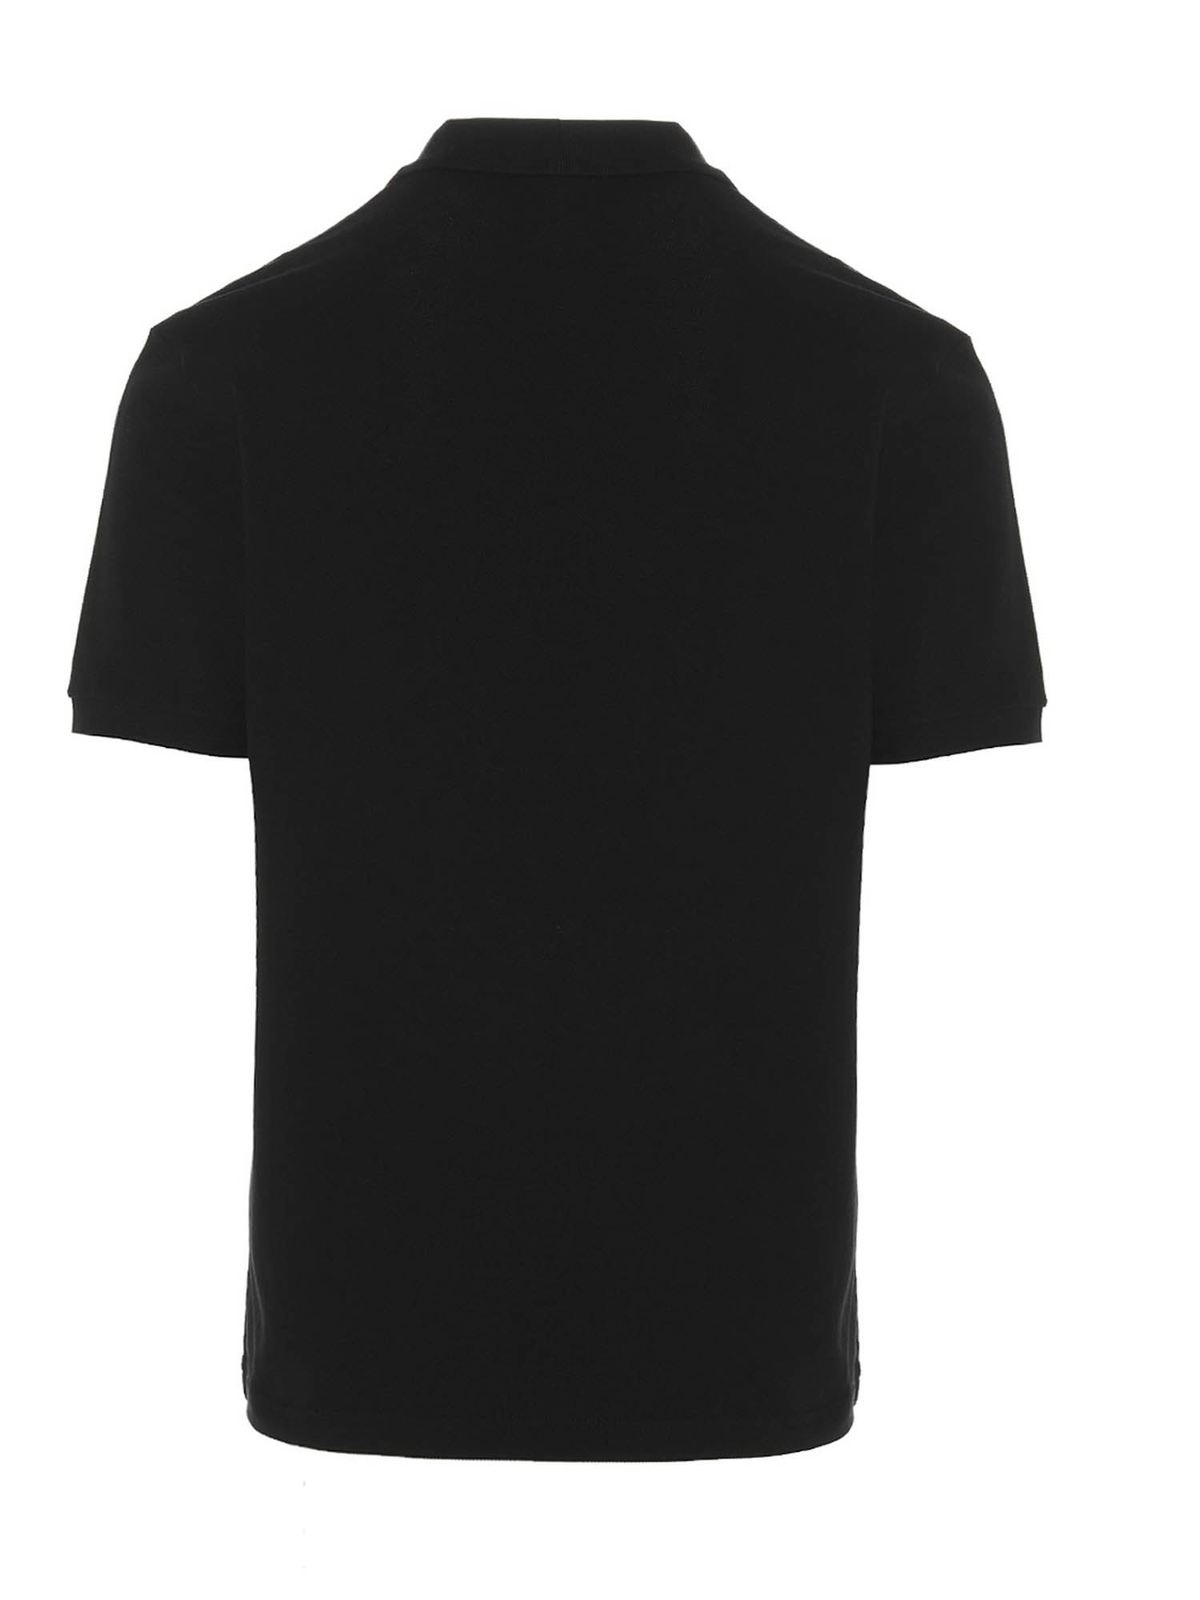 Moschino - Double Question Mark polo shirt in black - polo shirts ...